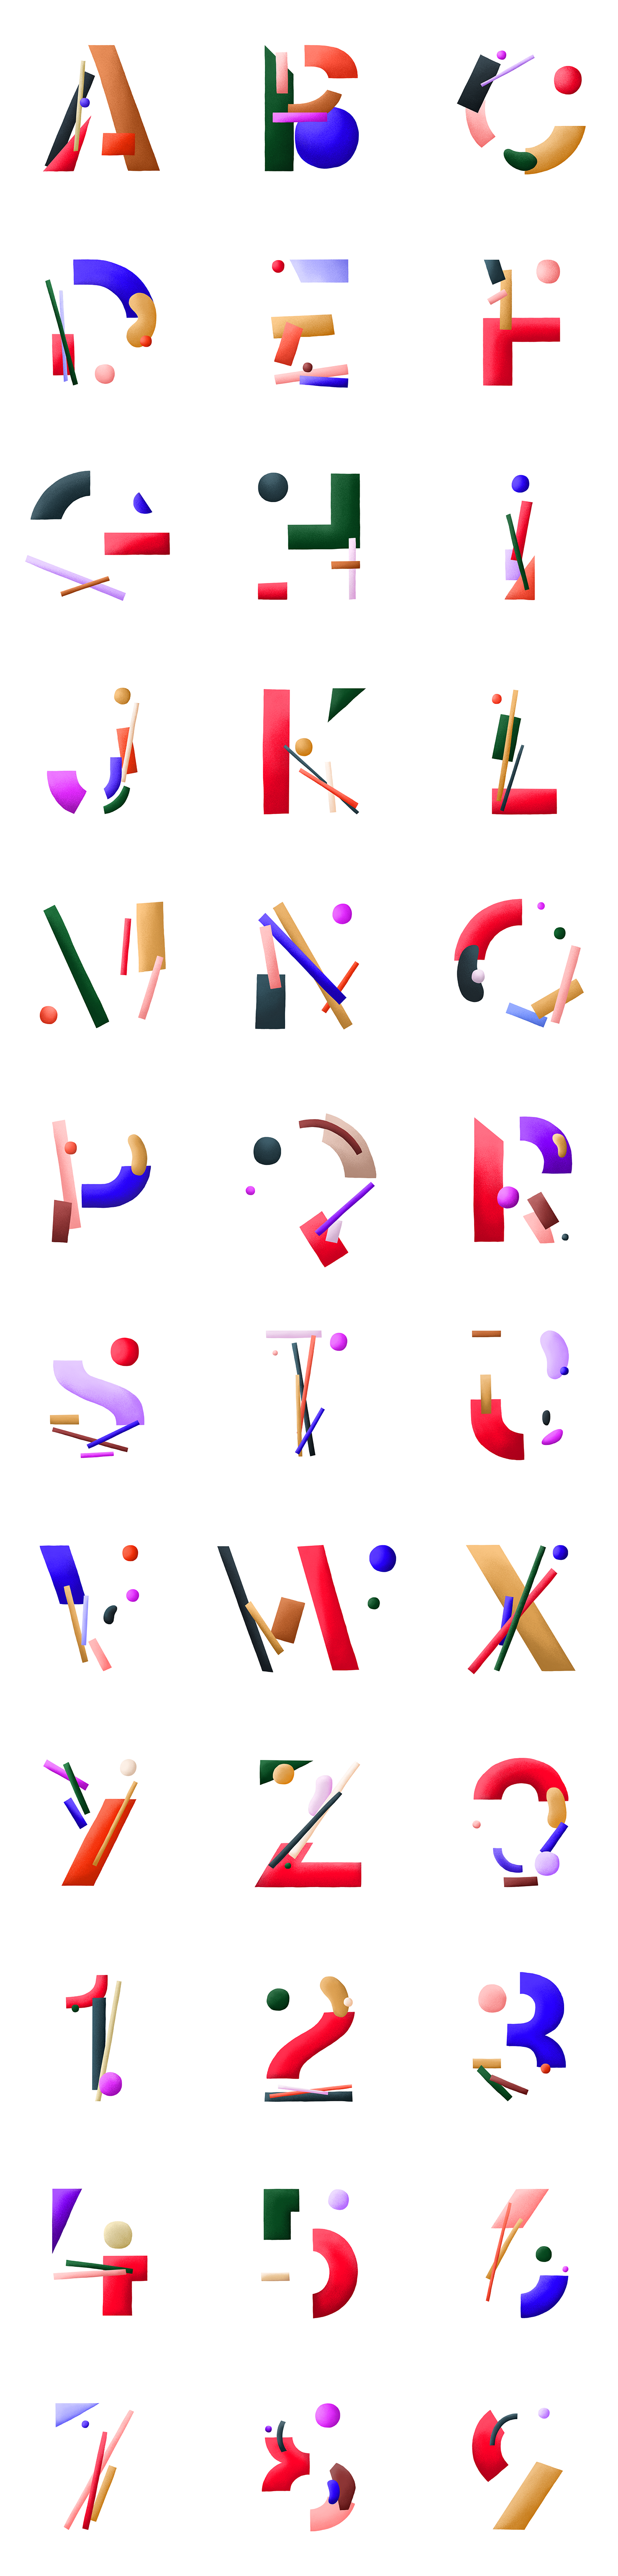 36 days type 36 days of typography   ILLUSTRATION  alphabet gt walshiem Grilli Type lettering abstract